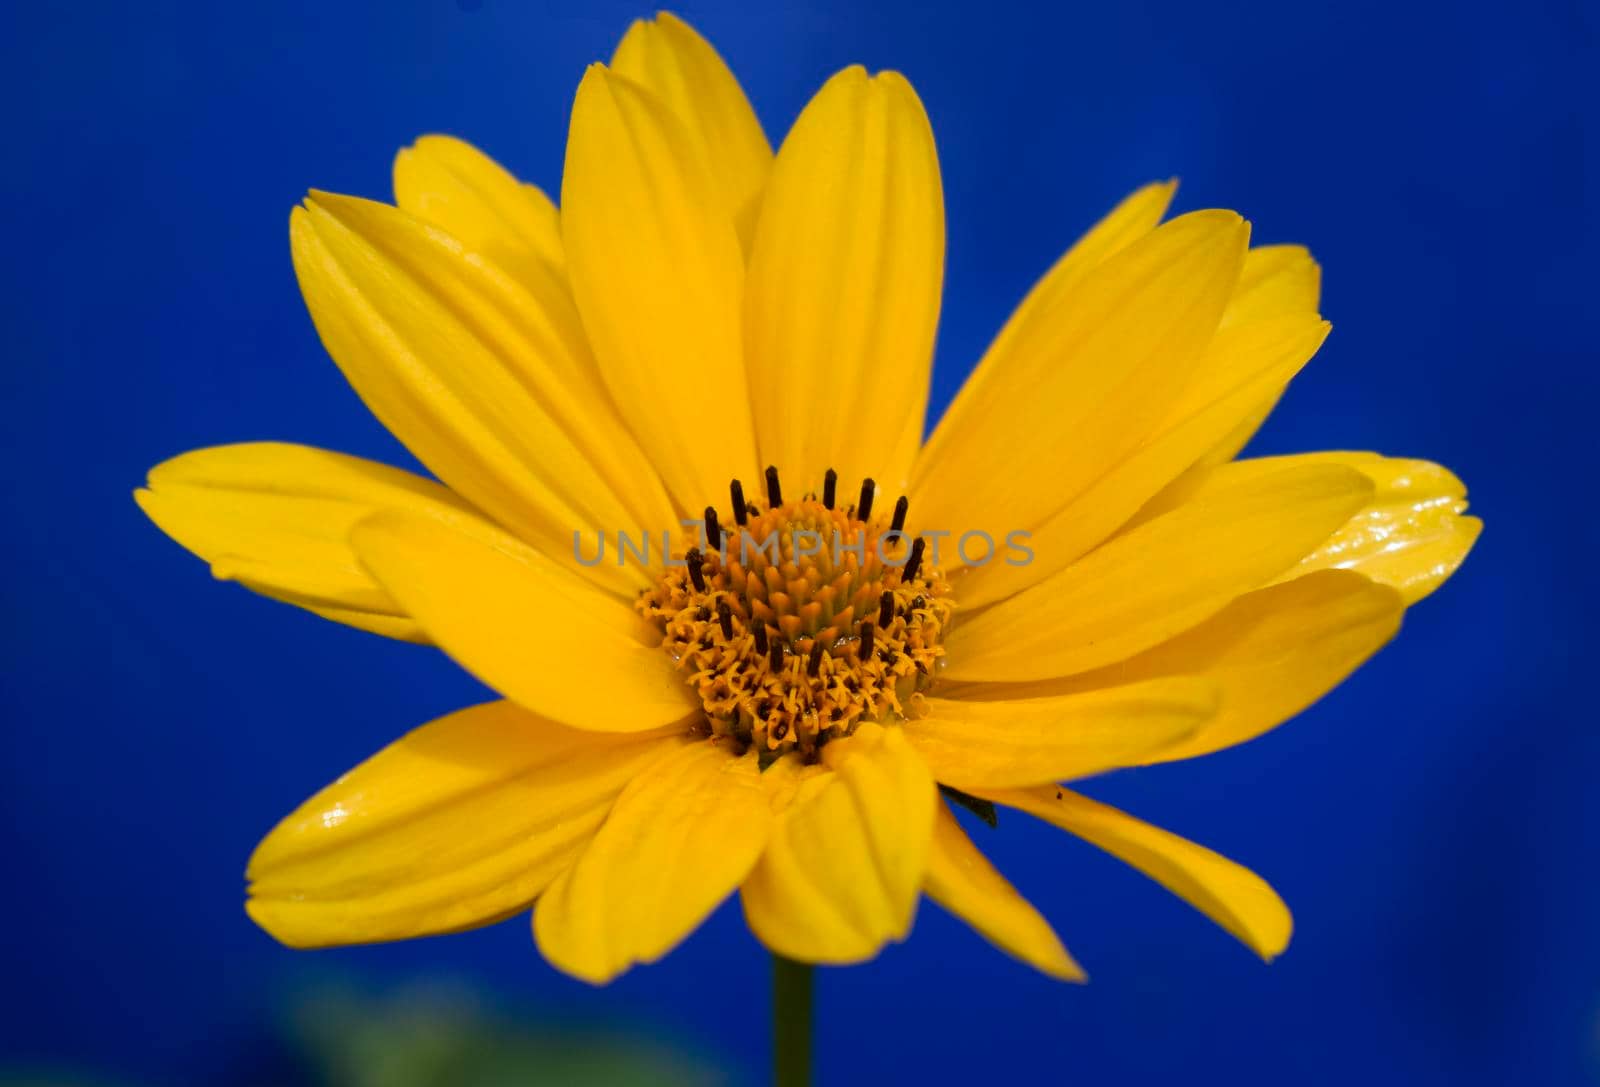 Yellow daisy flower (heliopsis) on the deep blue background.